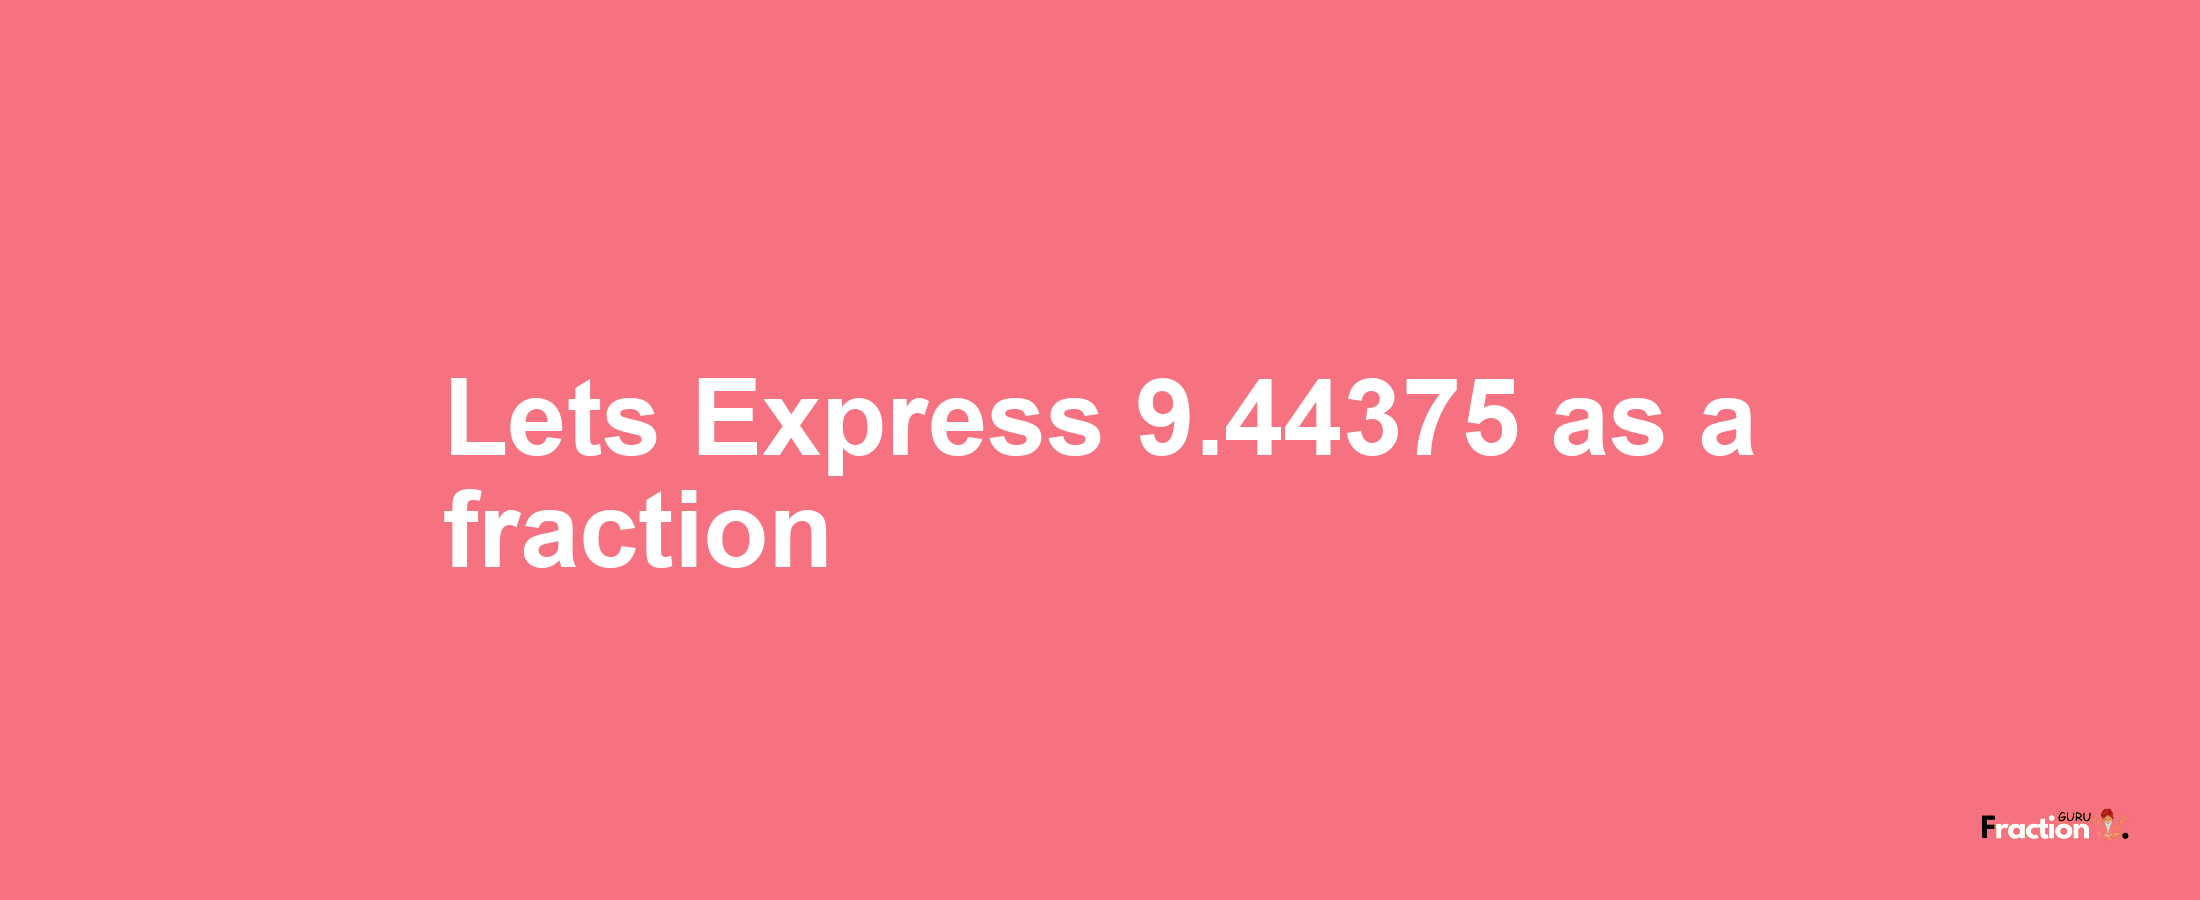 Lets Express 9.44375 as afraction